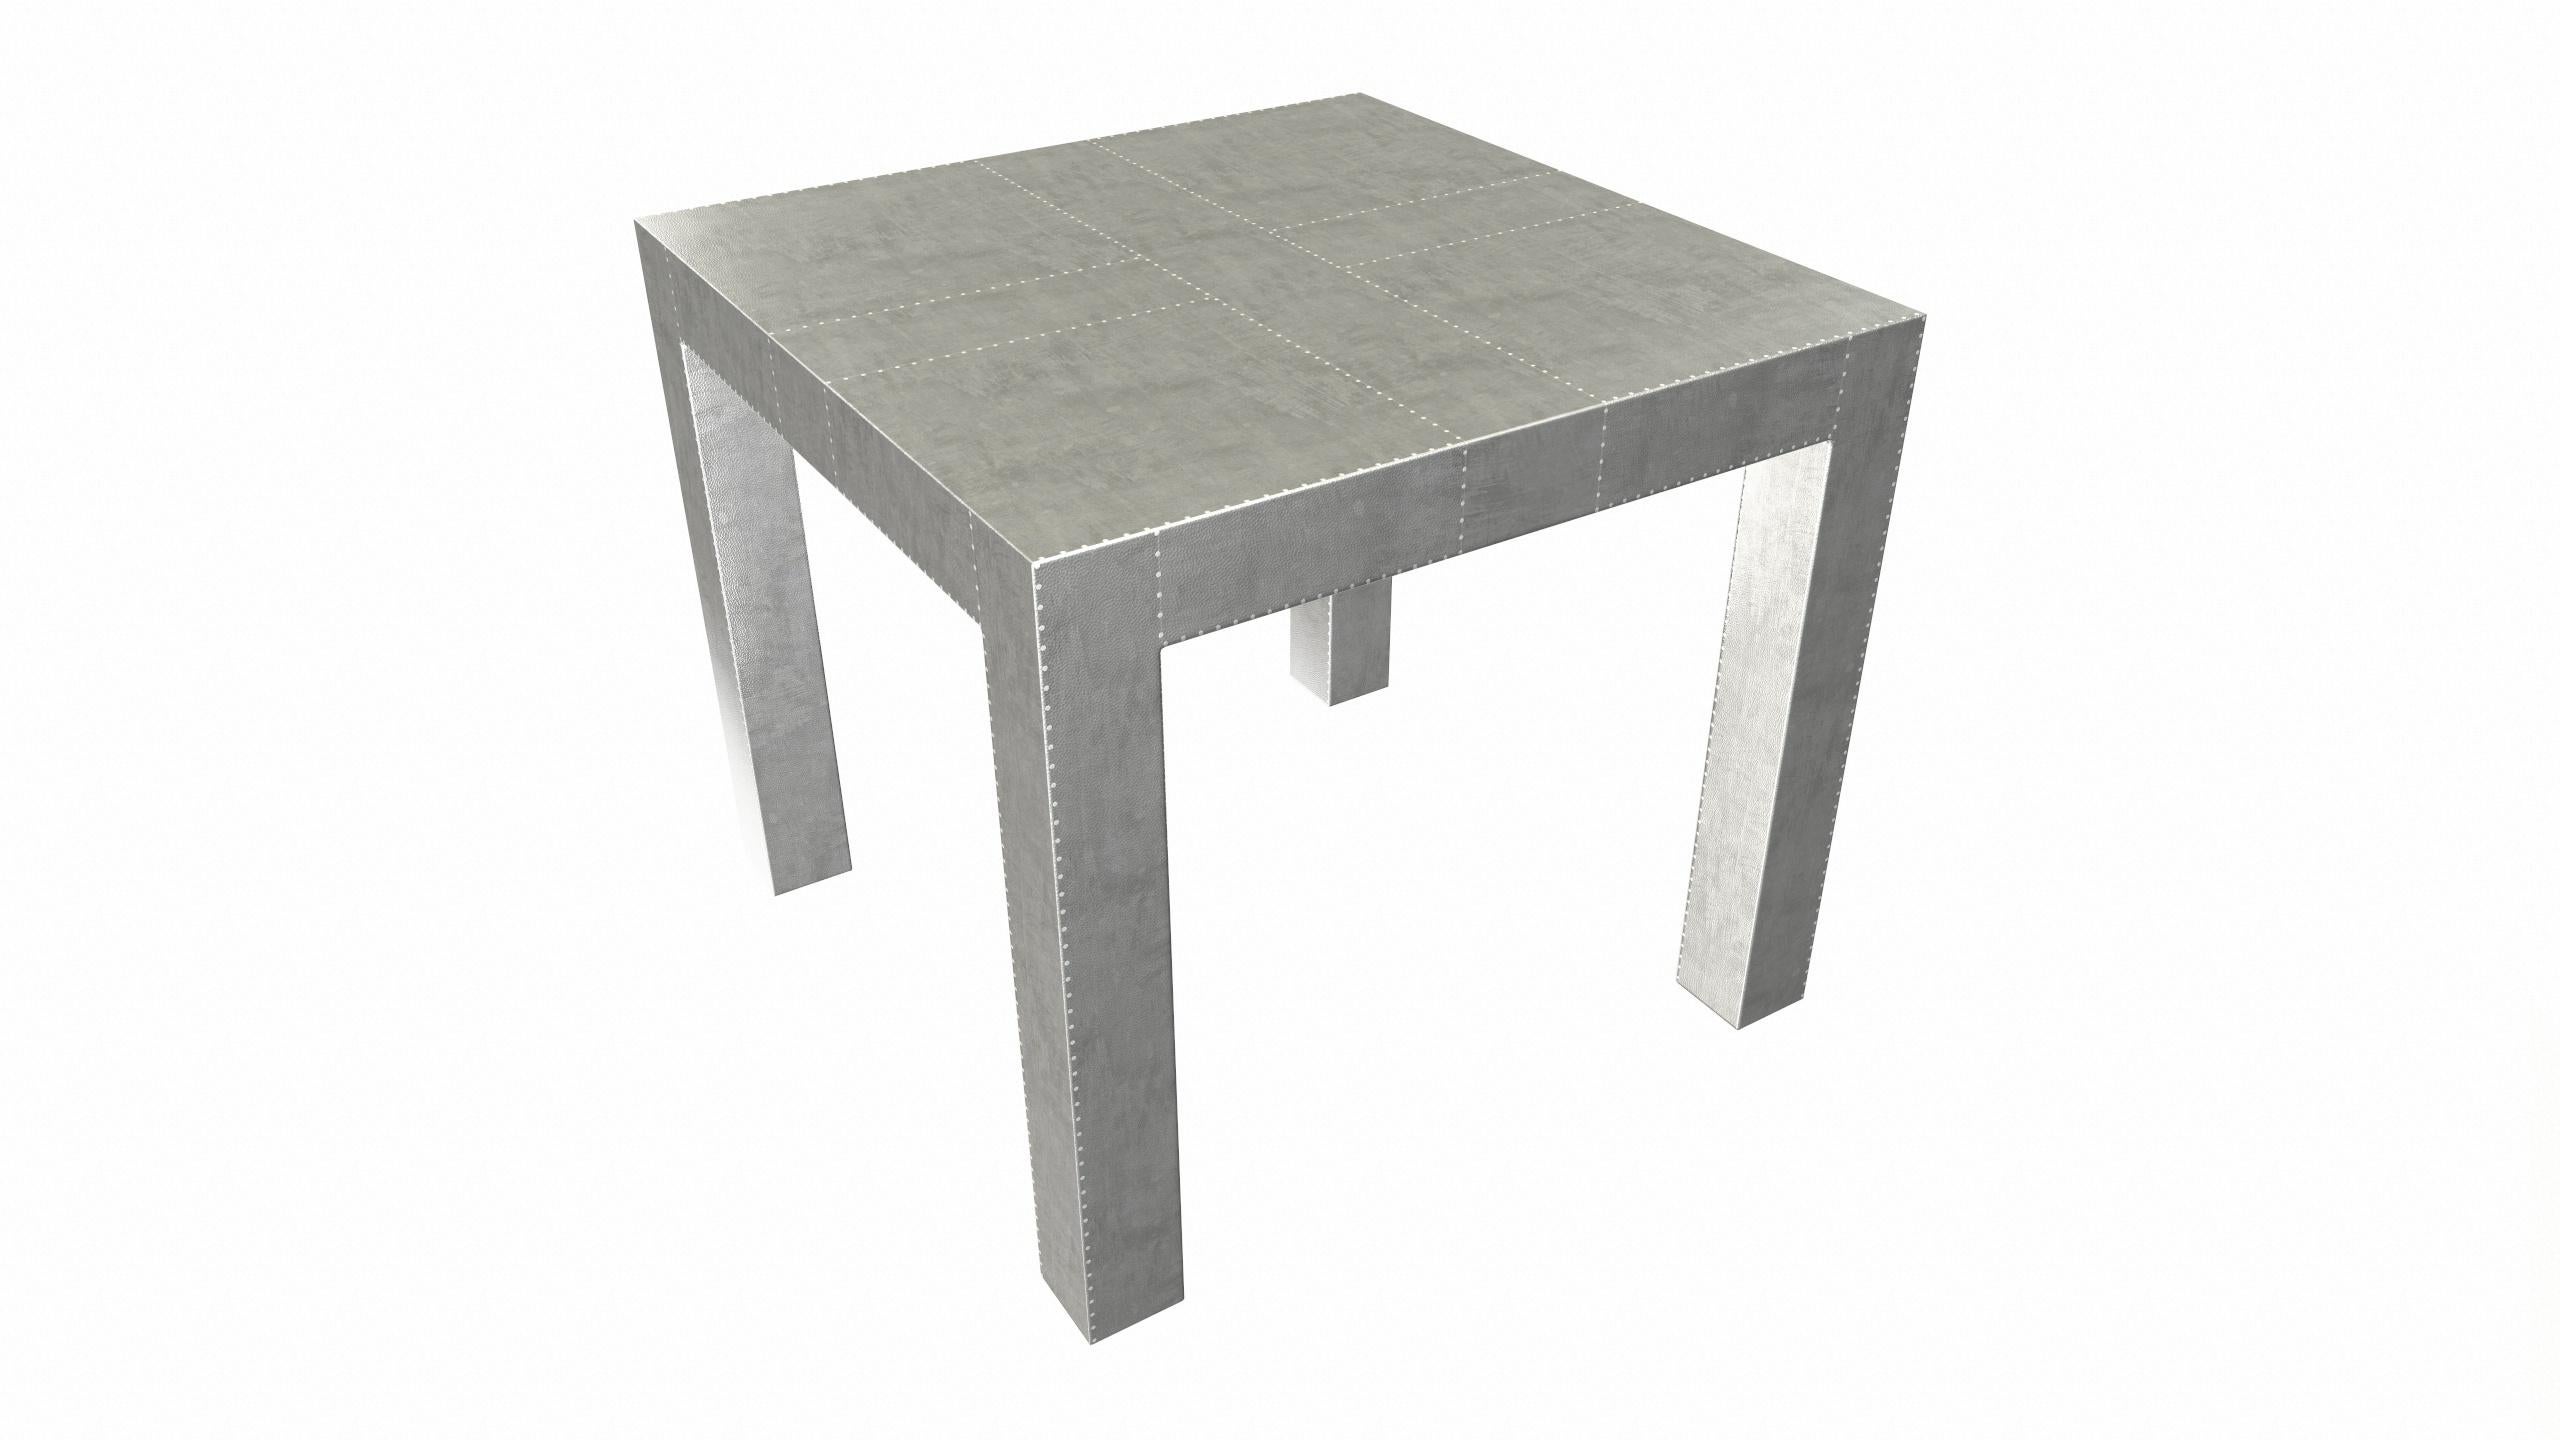 American Art Deco Square Drink Center Tables Mid. Hammered White Bronze by Alison Spear For Sale